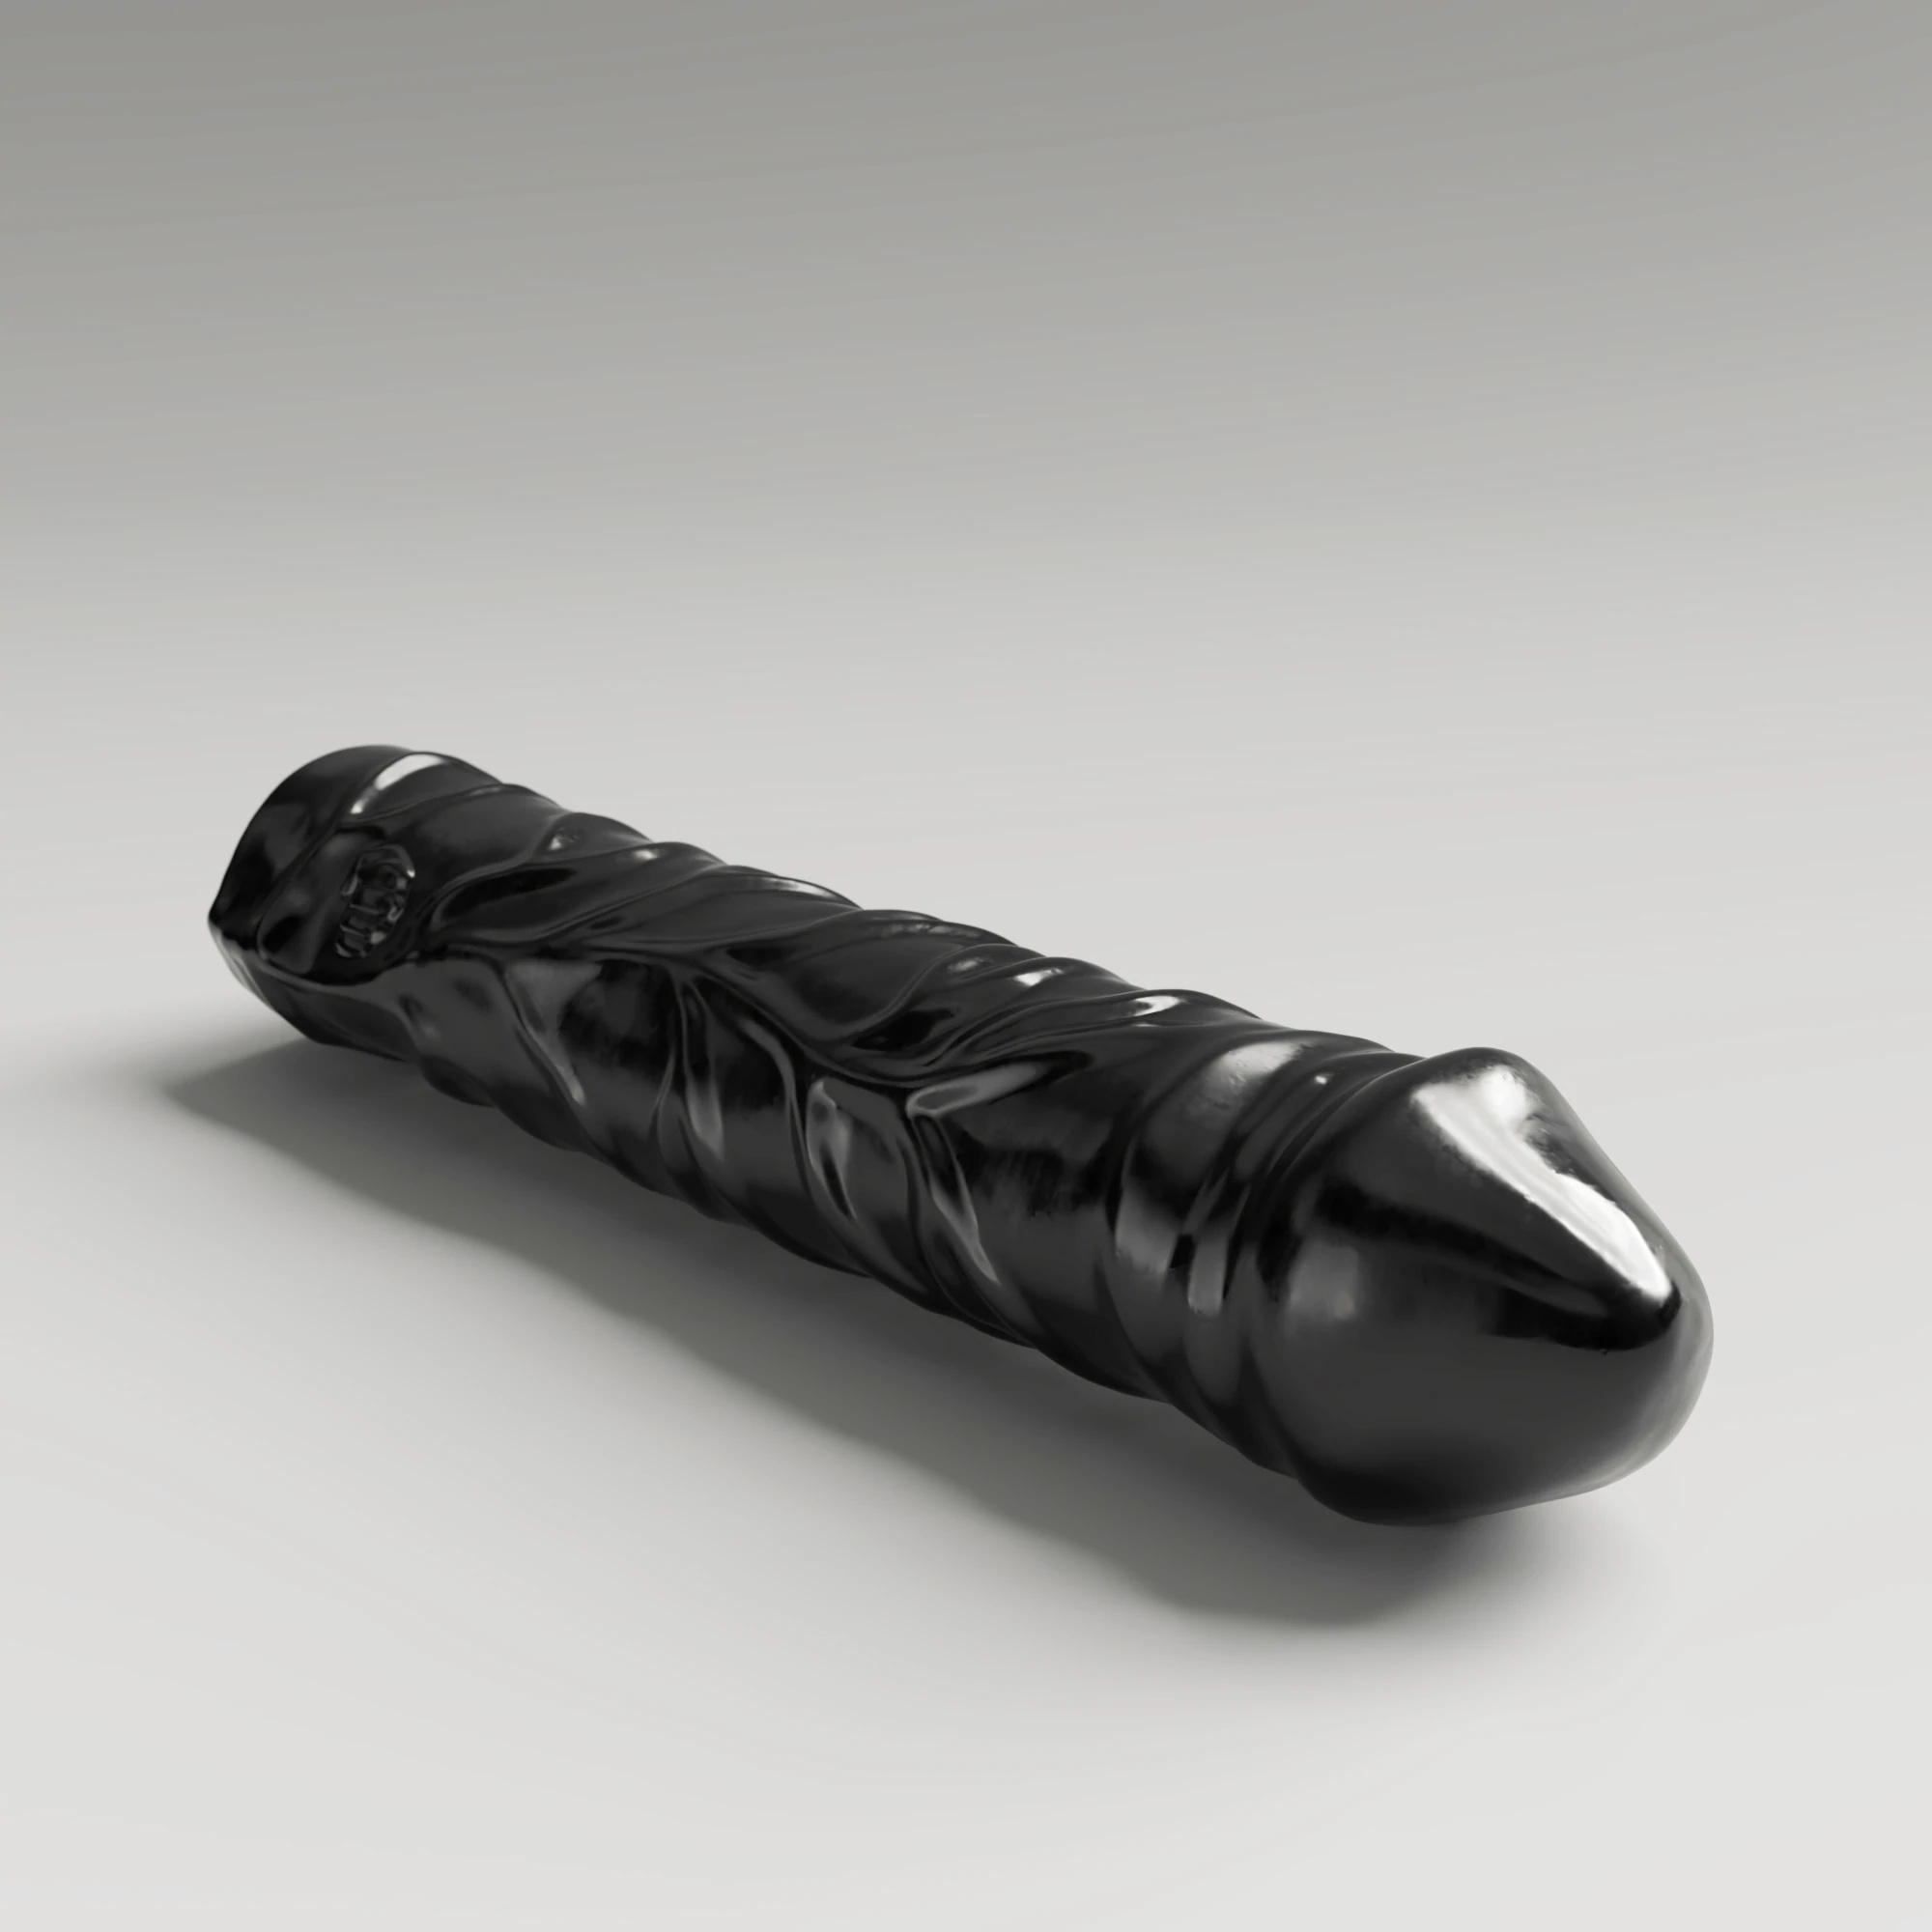 Sex Toys Wholesale Urban Burner The Best Dildos and Butt Plugs